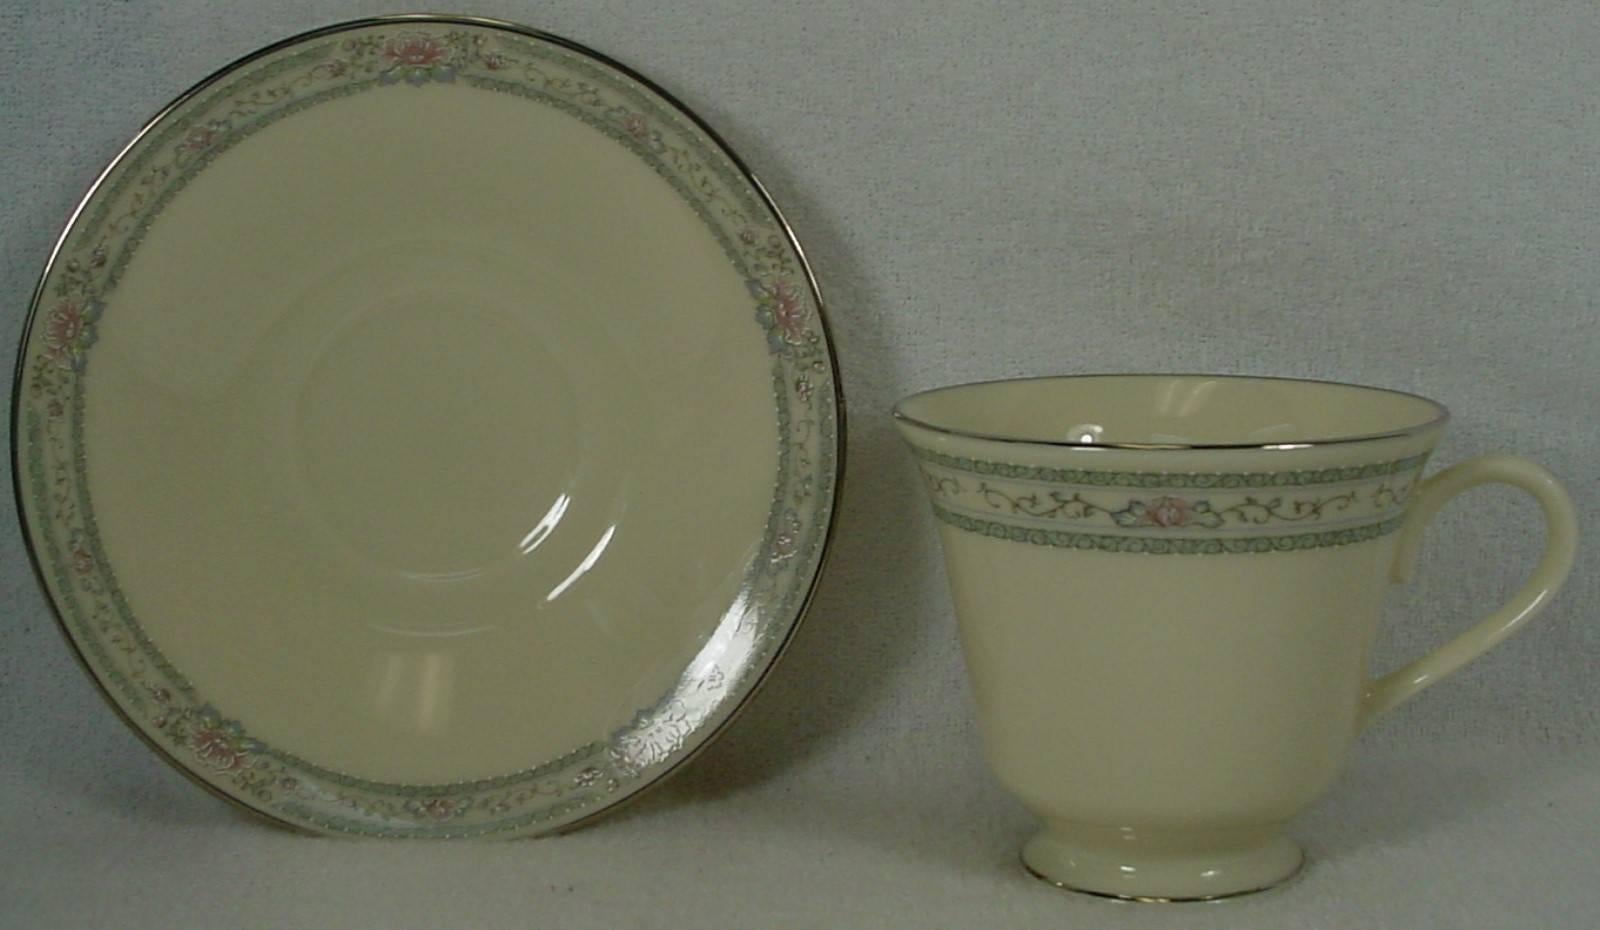 LENOX china CHARLESTON pattern 60-piece SET SERVICE for 12 

in great condition free from chips, cracks, breaks, stains, or discoloration and with only a minimum of use.

• Includes TWELVE each of Cups, Saucers, Dinner Plates, Salad Plates, and